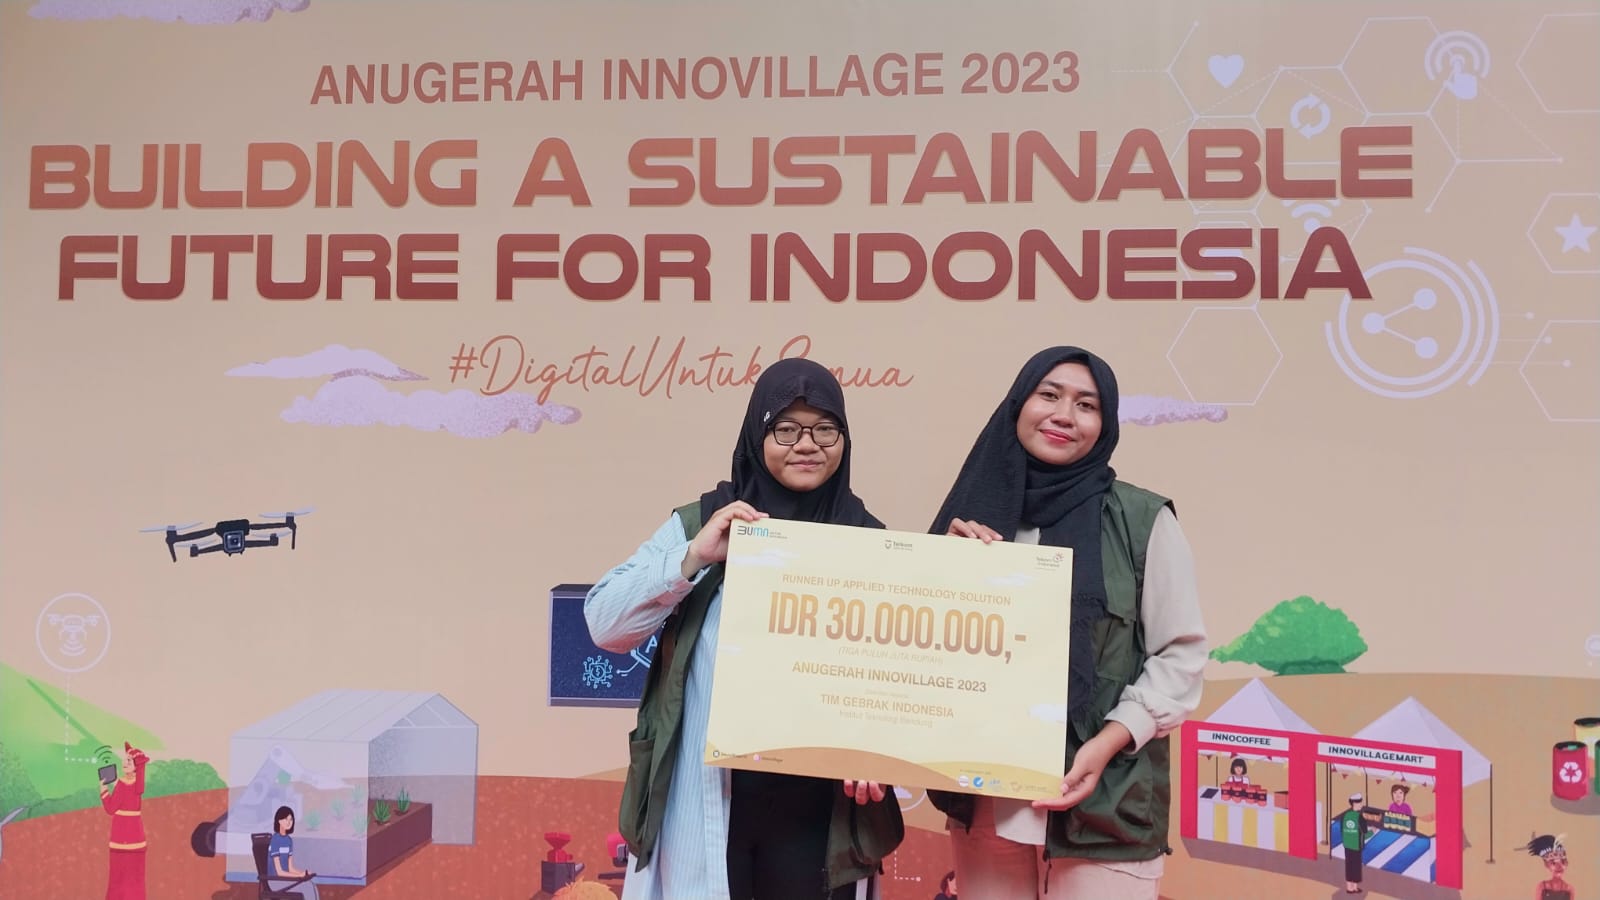 team-gebrak-indonesia-from-the-institut-teknologi-bandung-won-the-innovillage-2023-competition